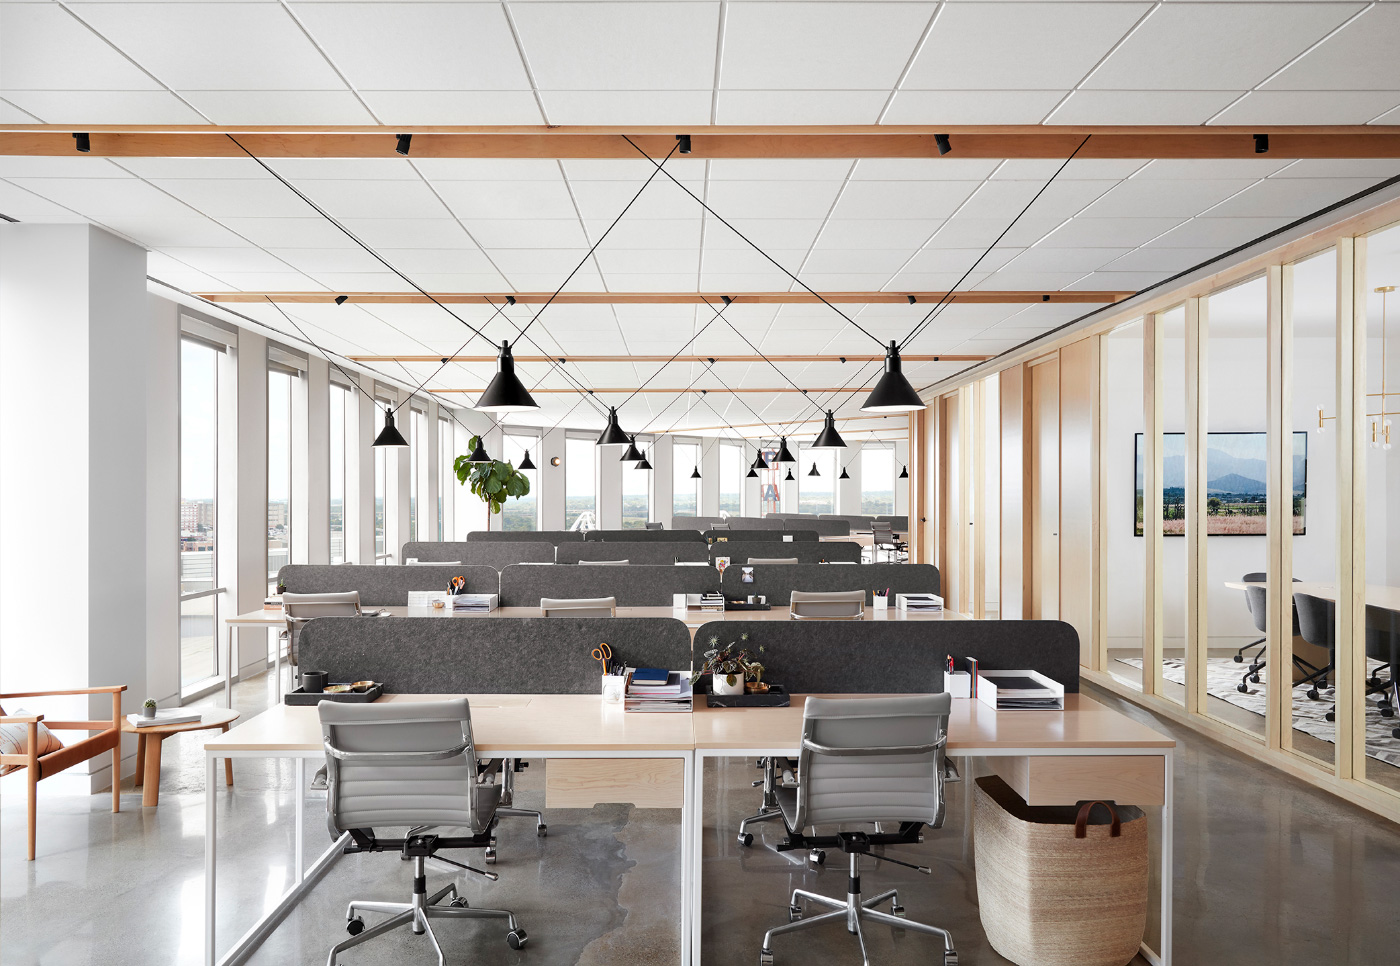 The Thoughtbarn-designed office has pendant lights and exposed beams